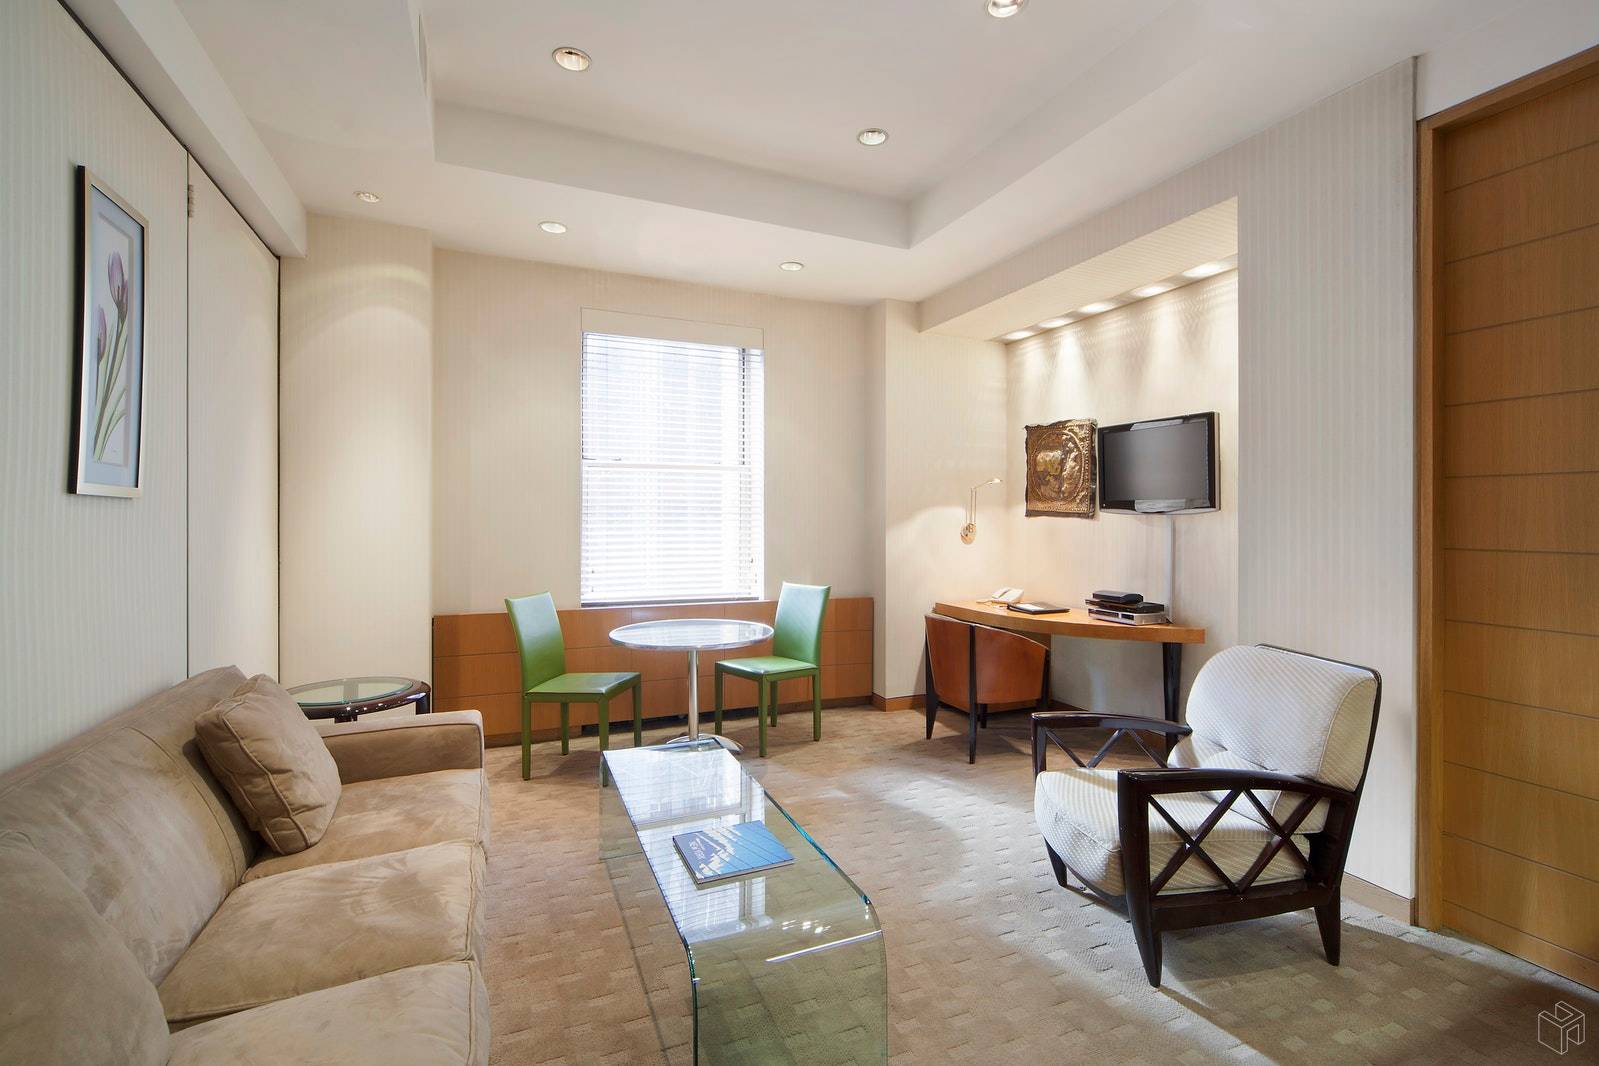 Sophisticated, spacious high floor 3 1 2 room one bedroom, 1bath apartment exuding charm, serenity amp ; style perfect for a Manhattan full time residence pied a terre investment.